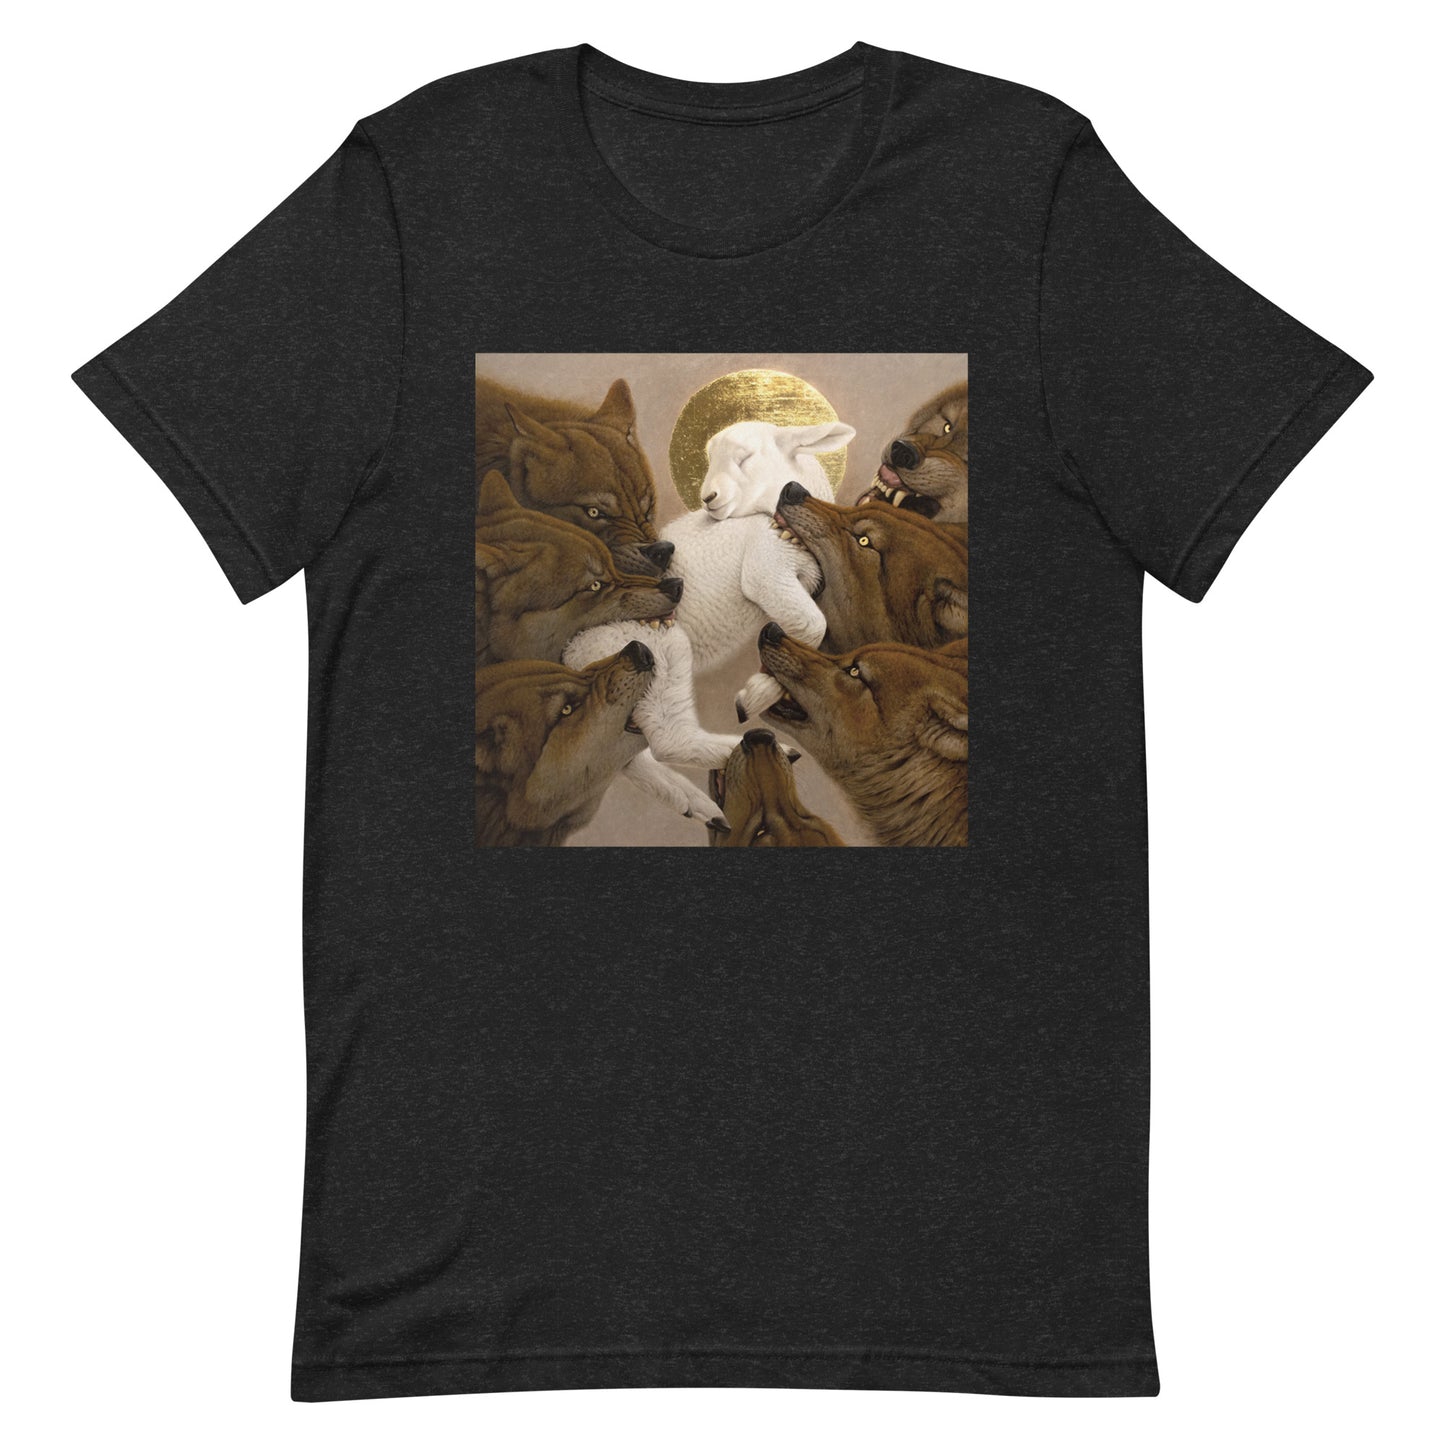 Lamb and Wolves| Unisex t-shirt